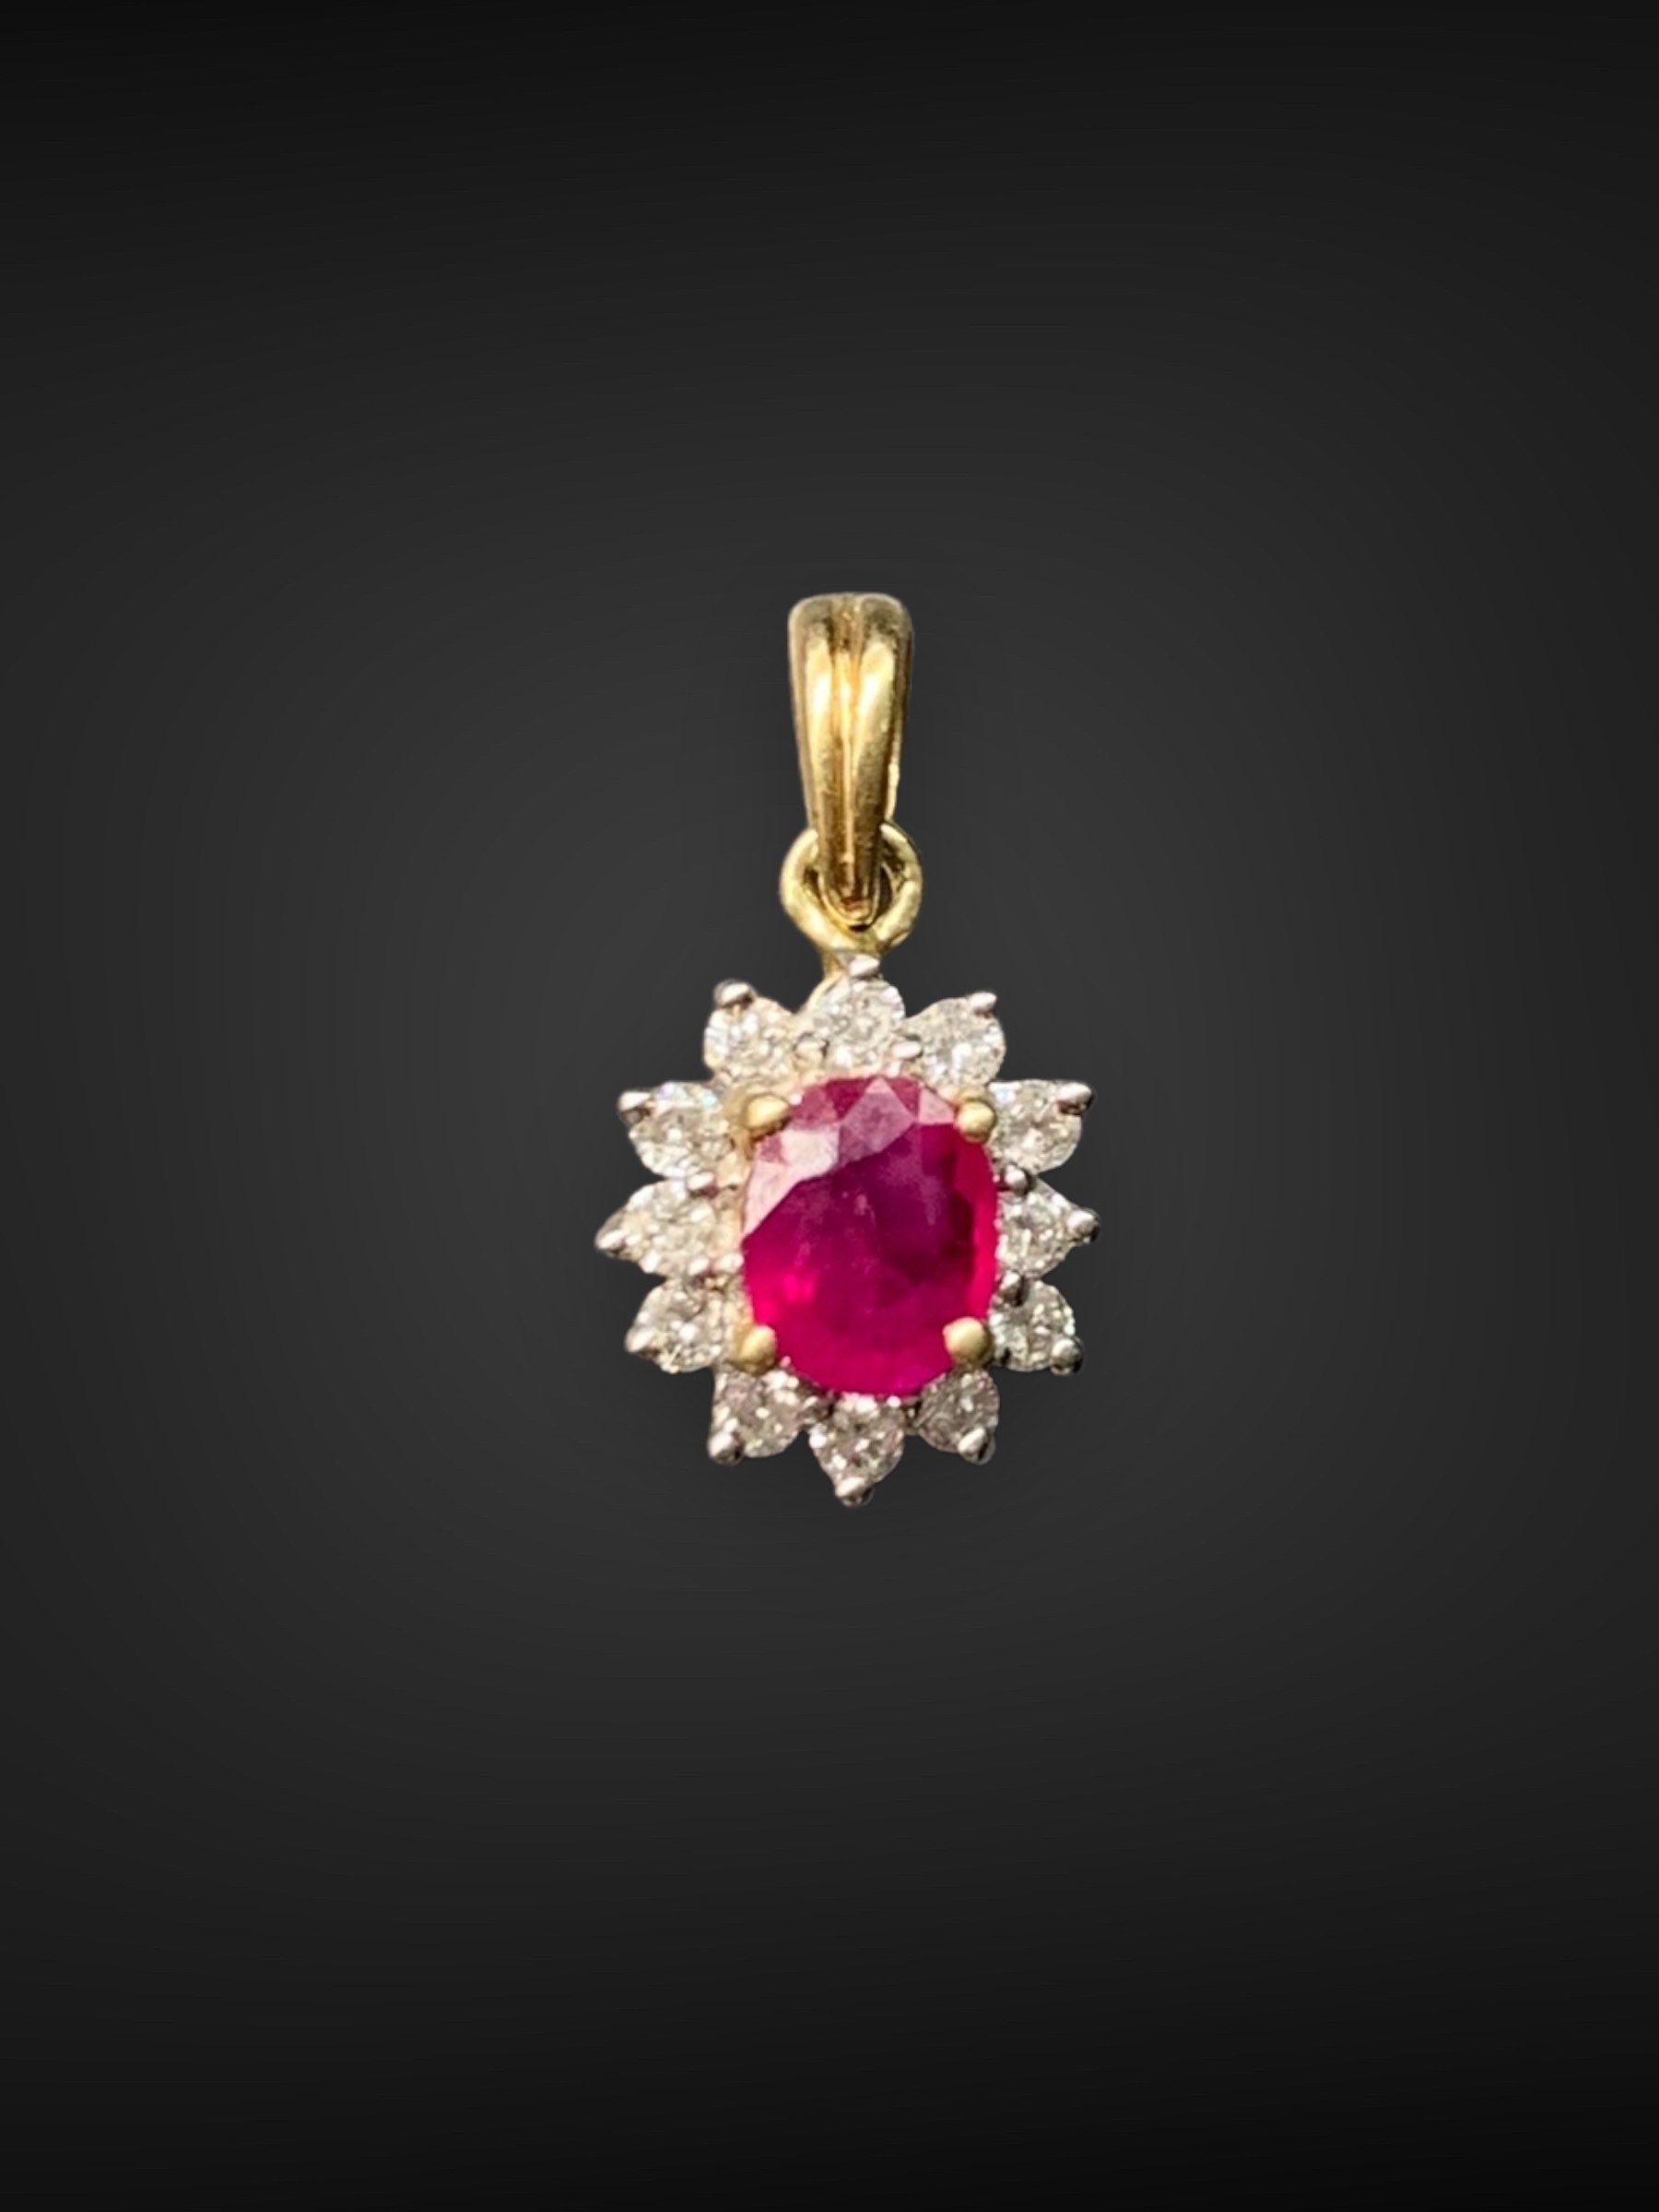 Lightbox Lab-Grown .50ct Pink Diamond Halo Pendant Necklace in 10k White  Gold